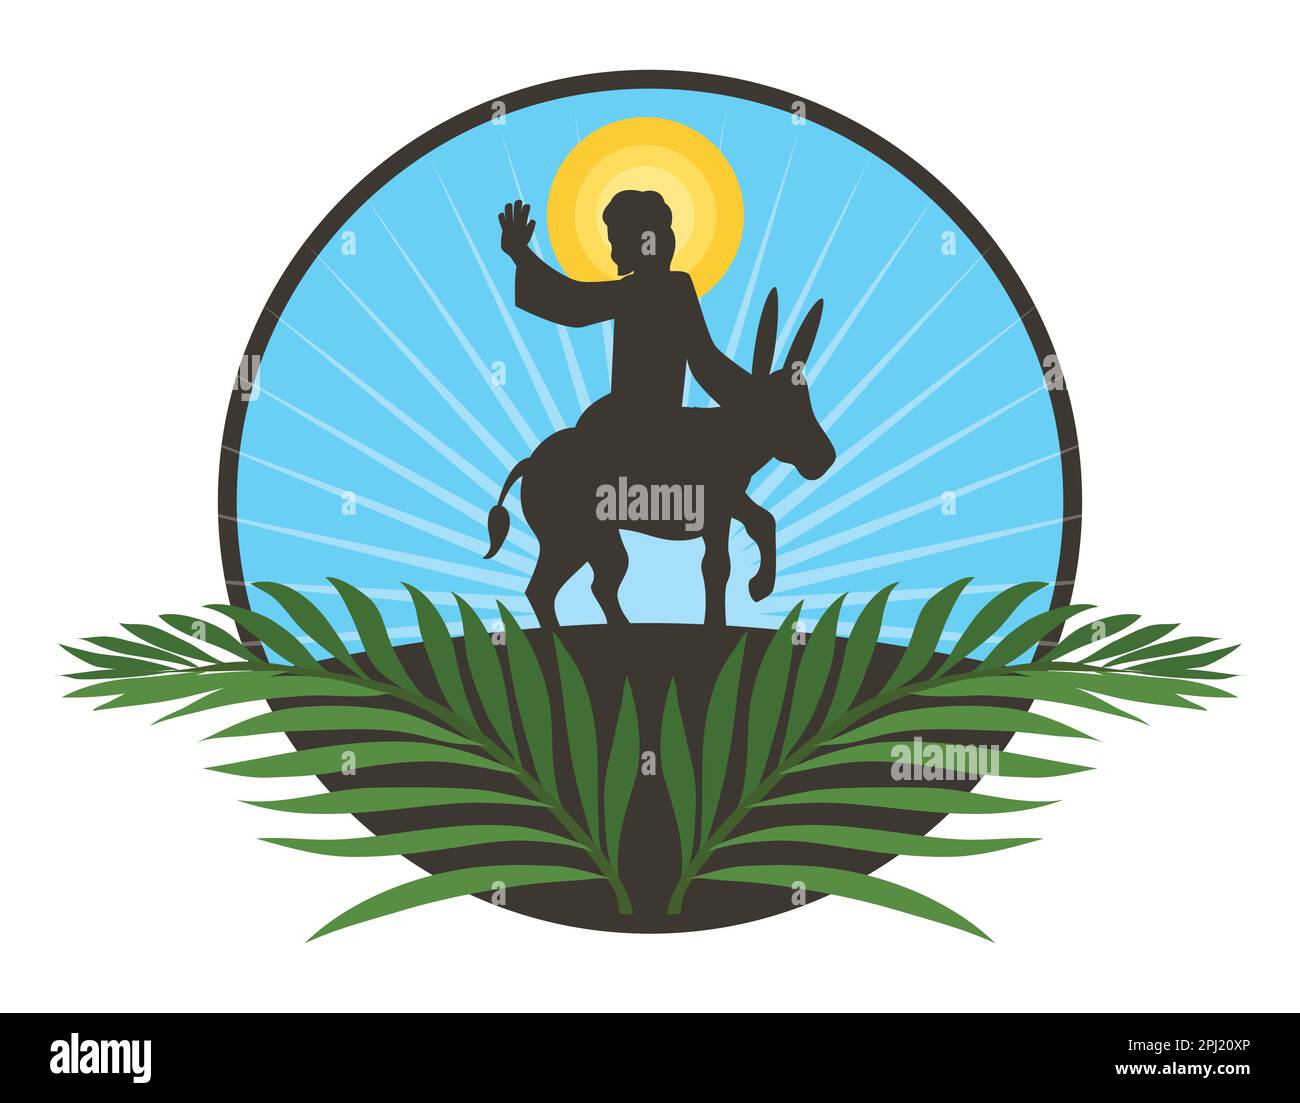 Round button with palm branches and silhouette scene of Jesus riding a donkey to commemorate Palm Sunday. Flat style design over white background. Stock Vector